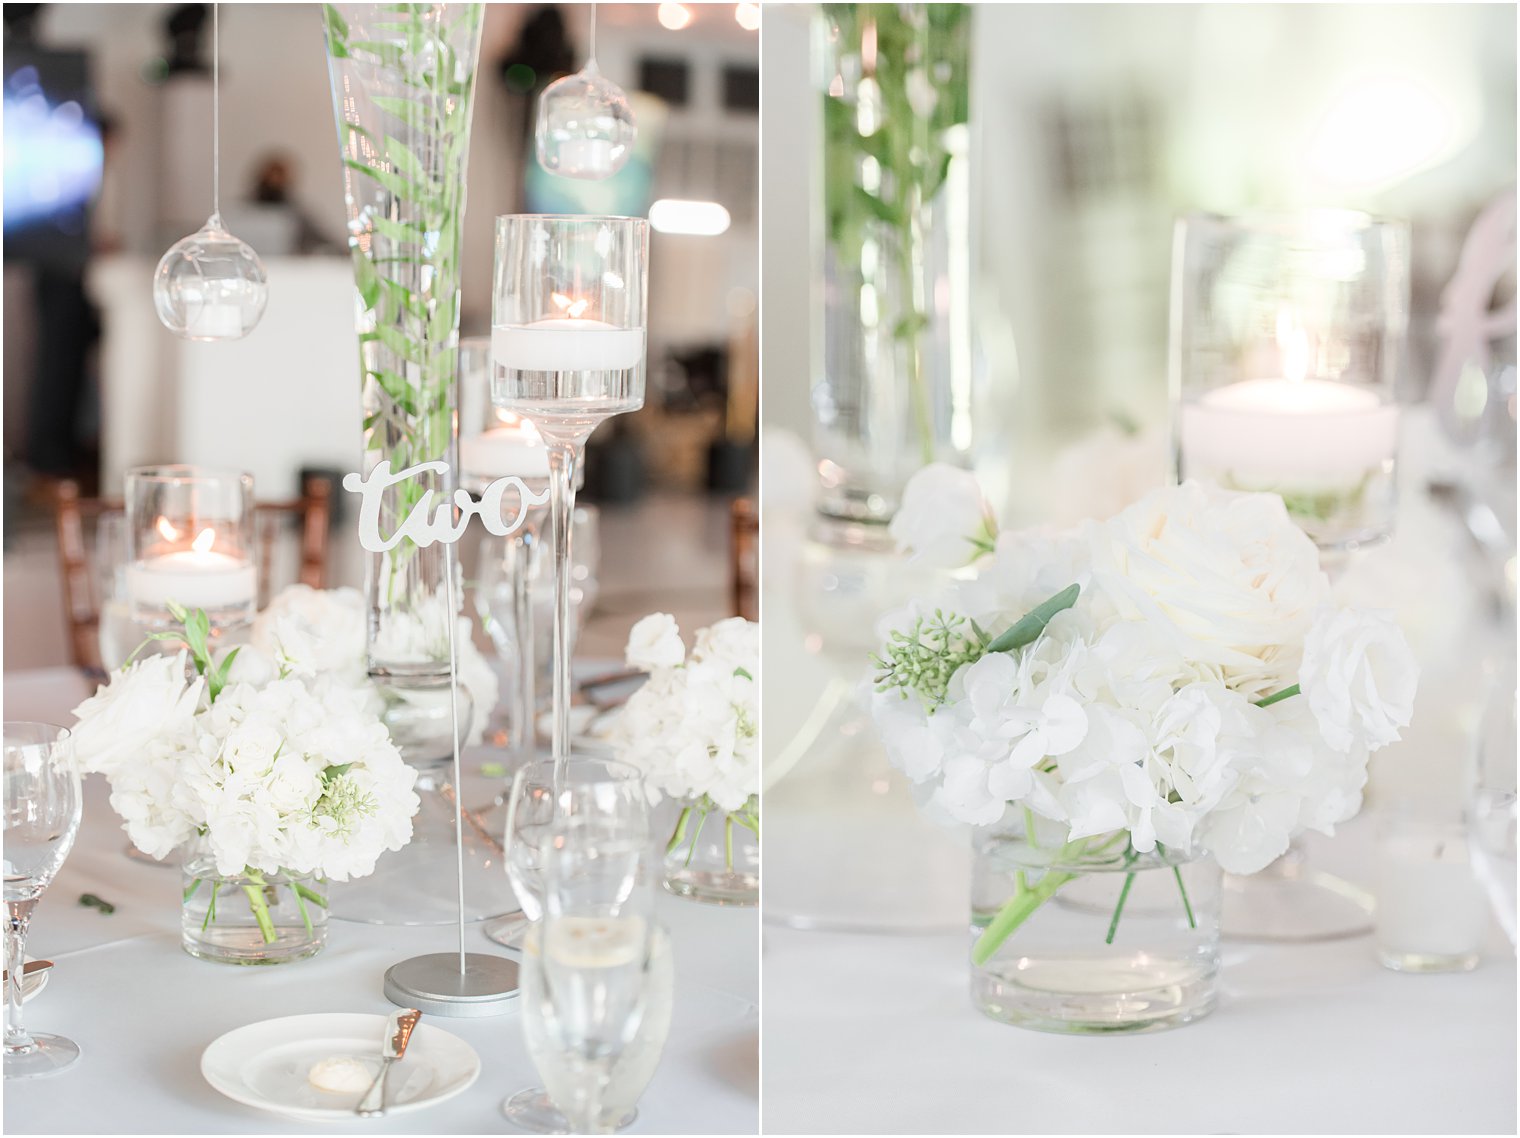 modern chic wedding centerpieces with floating candles and white flowers